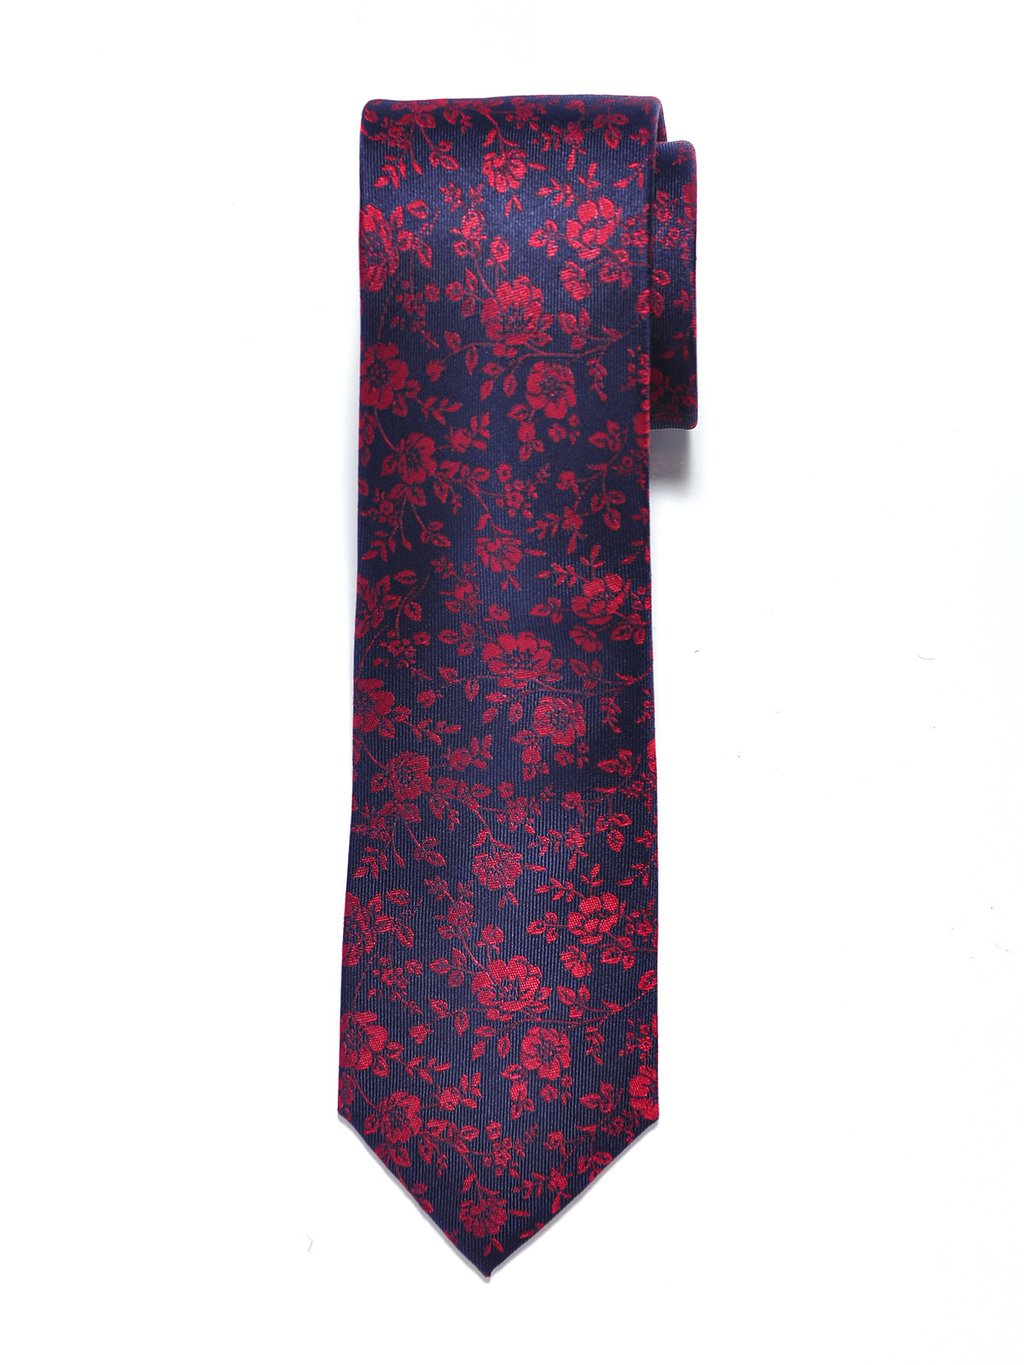 Navy Blue and Red Rose Floral Silk Tie